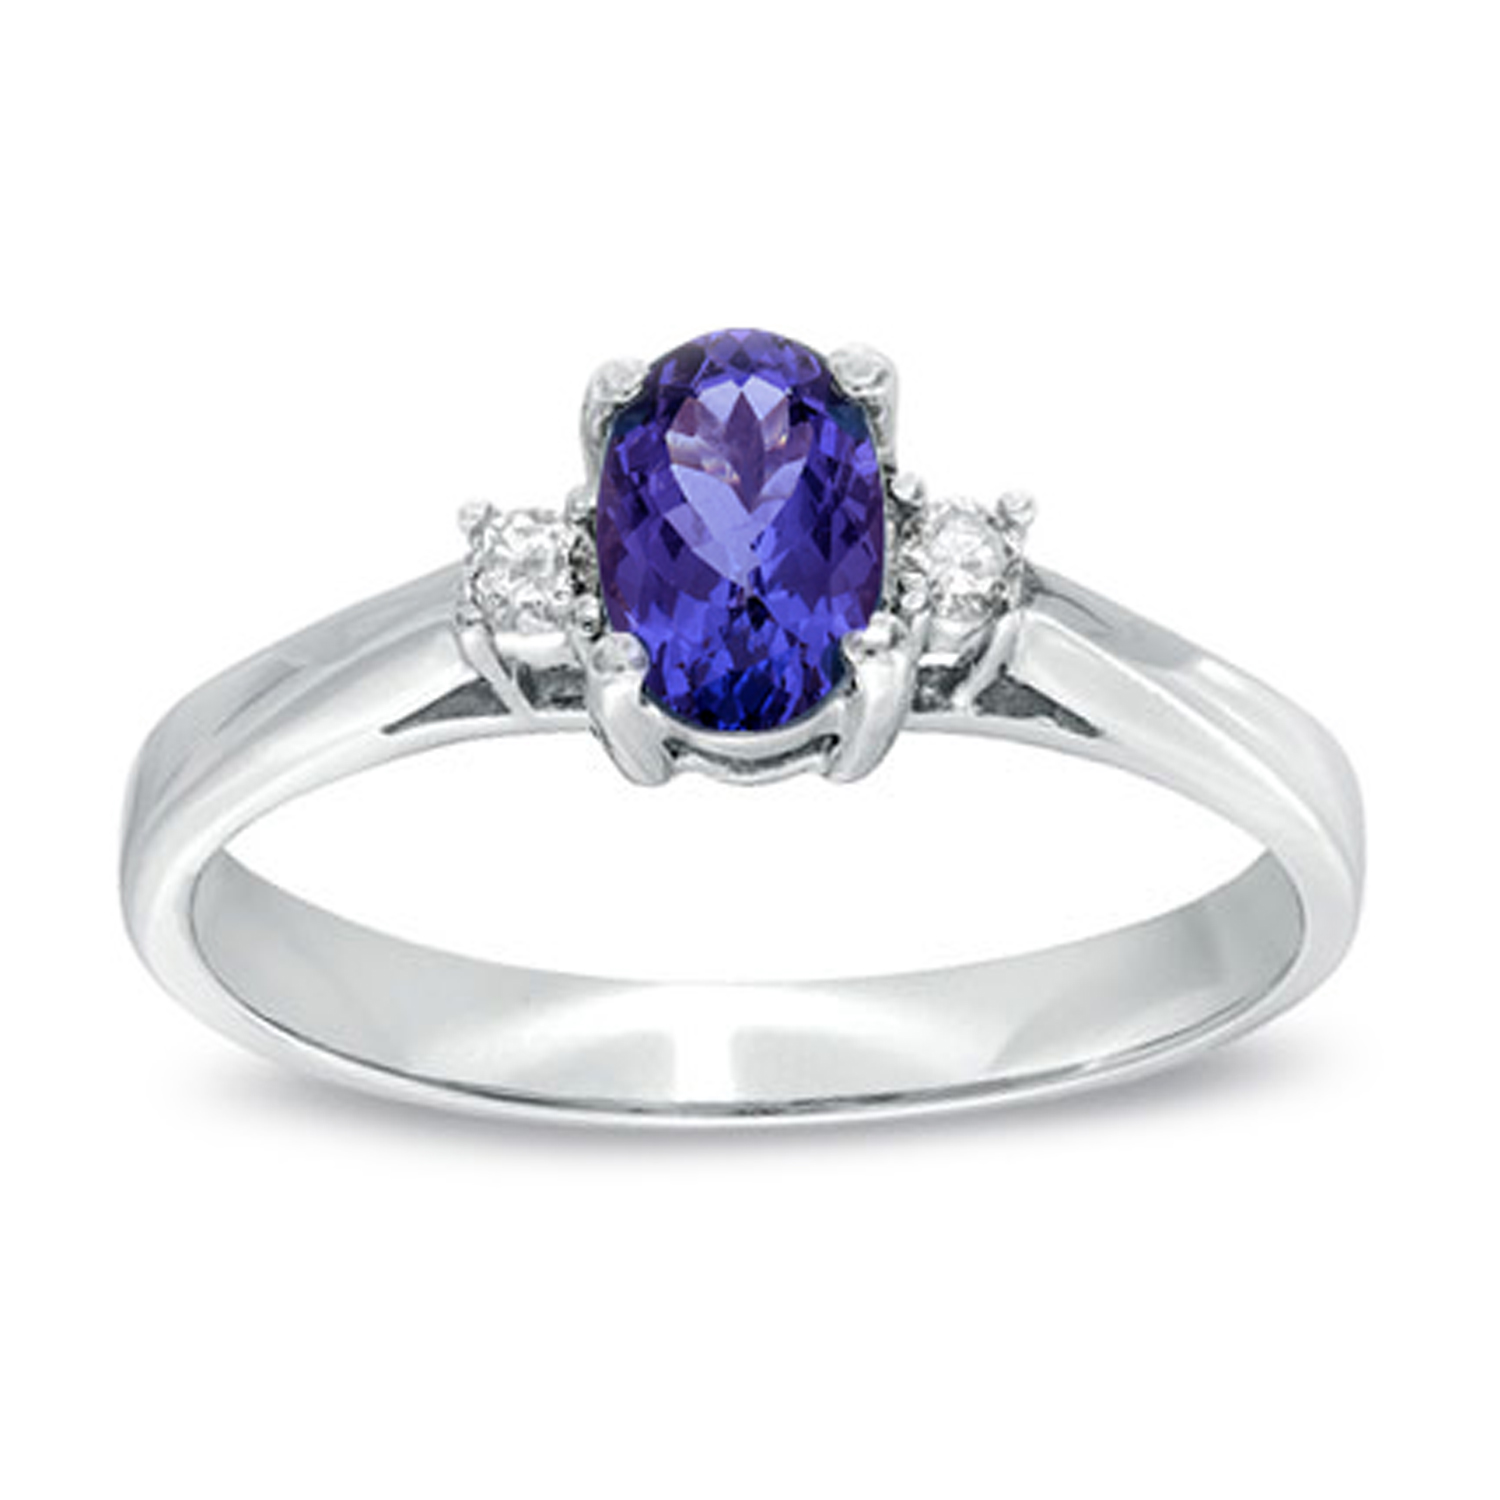 View 0.53cttw Tanzanite and Diamond Ring set in 14k Gold